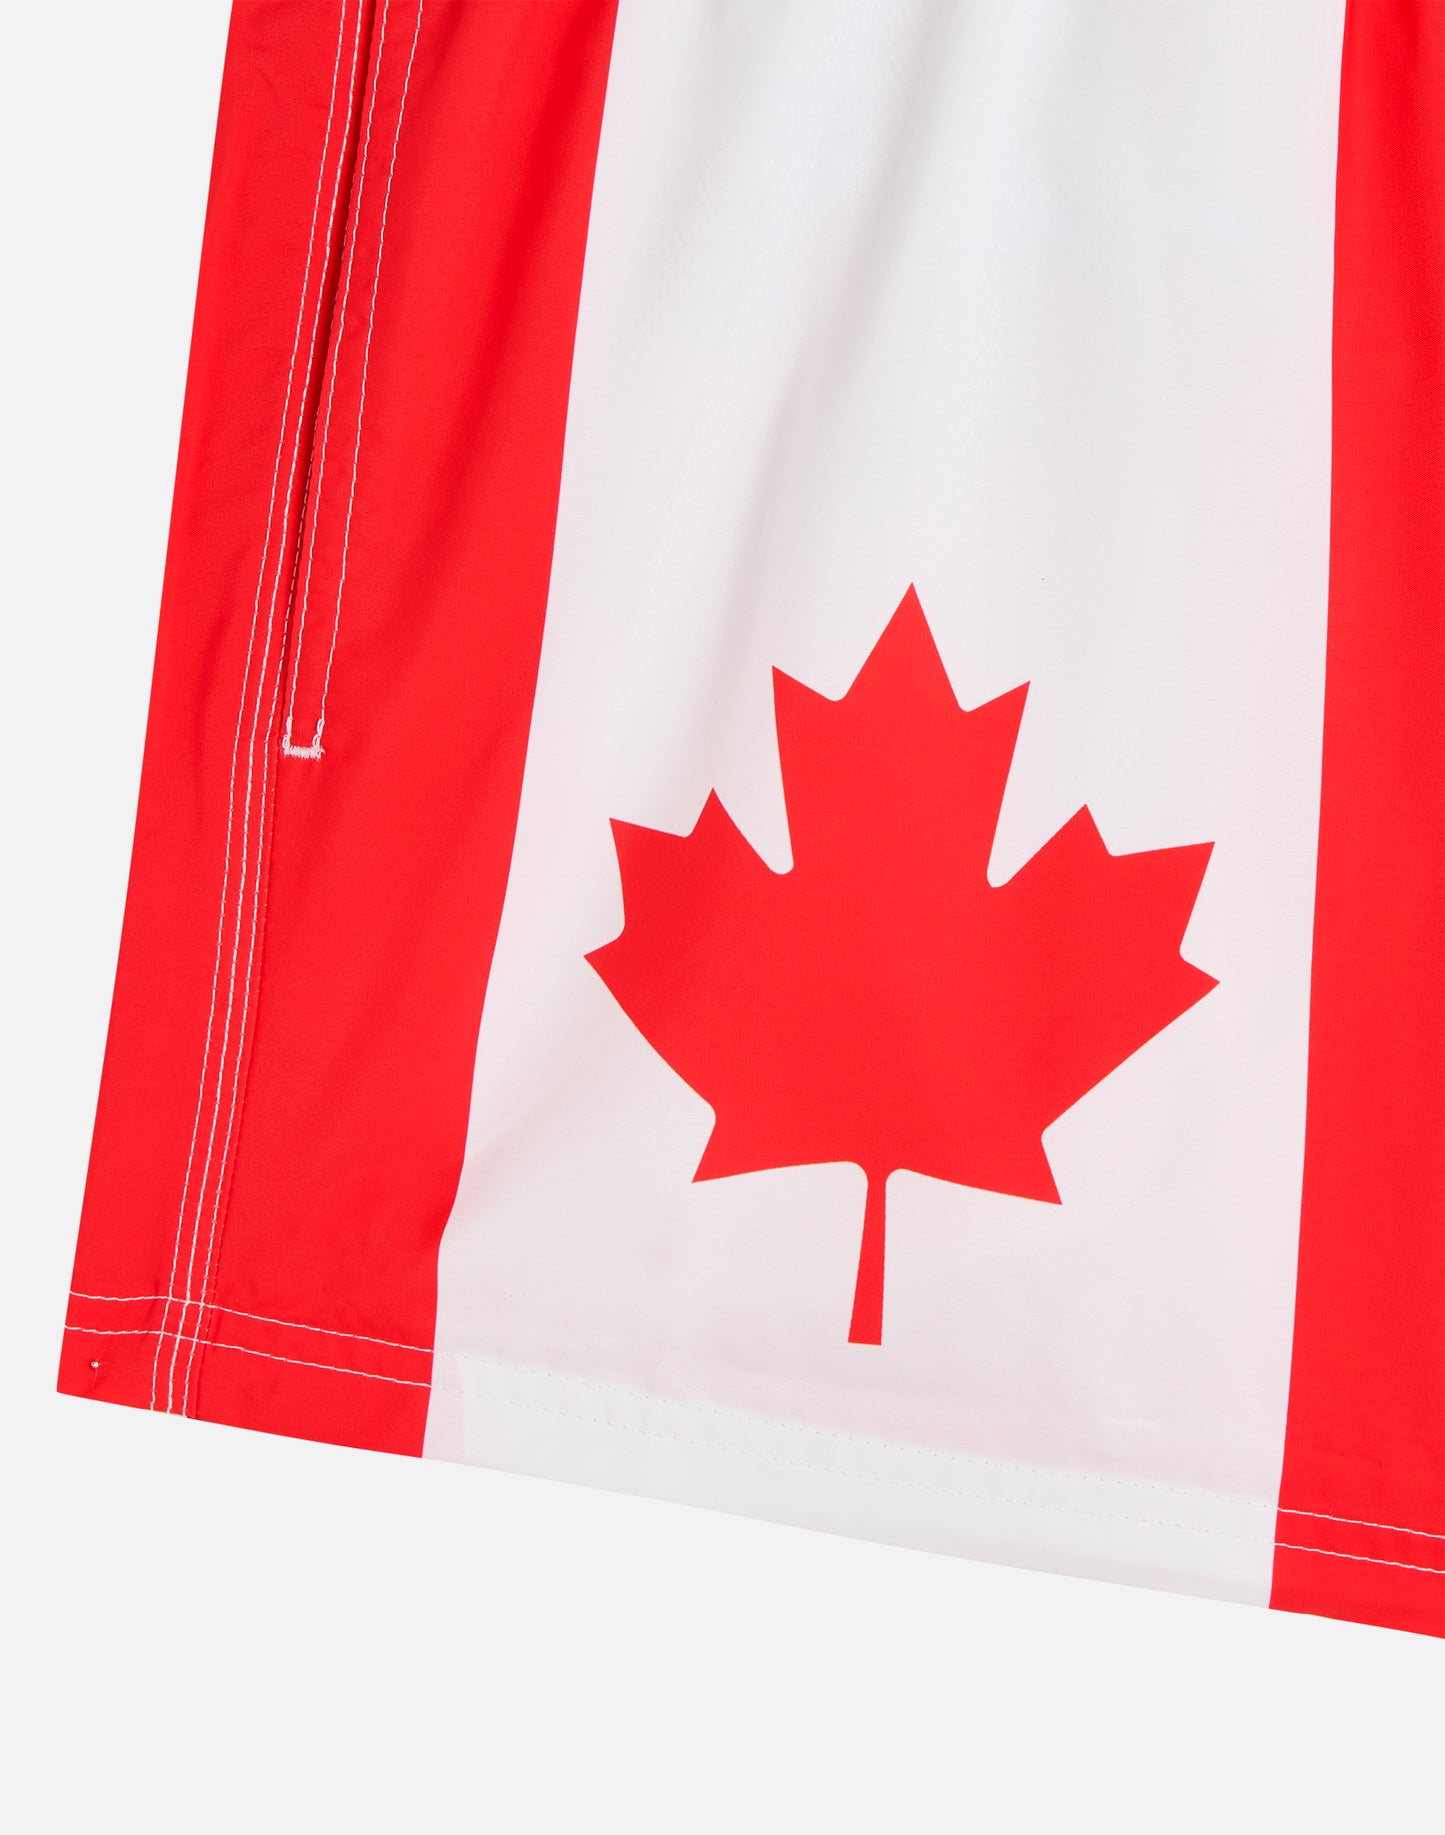 SHORT SWIM SHORTS WITH AN ELASTICATED WAISTBAND RECYCLED POLYESTER REPREVE® CANADA FLAG